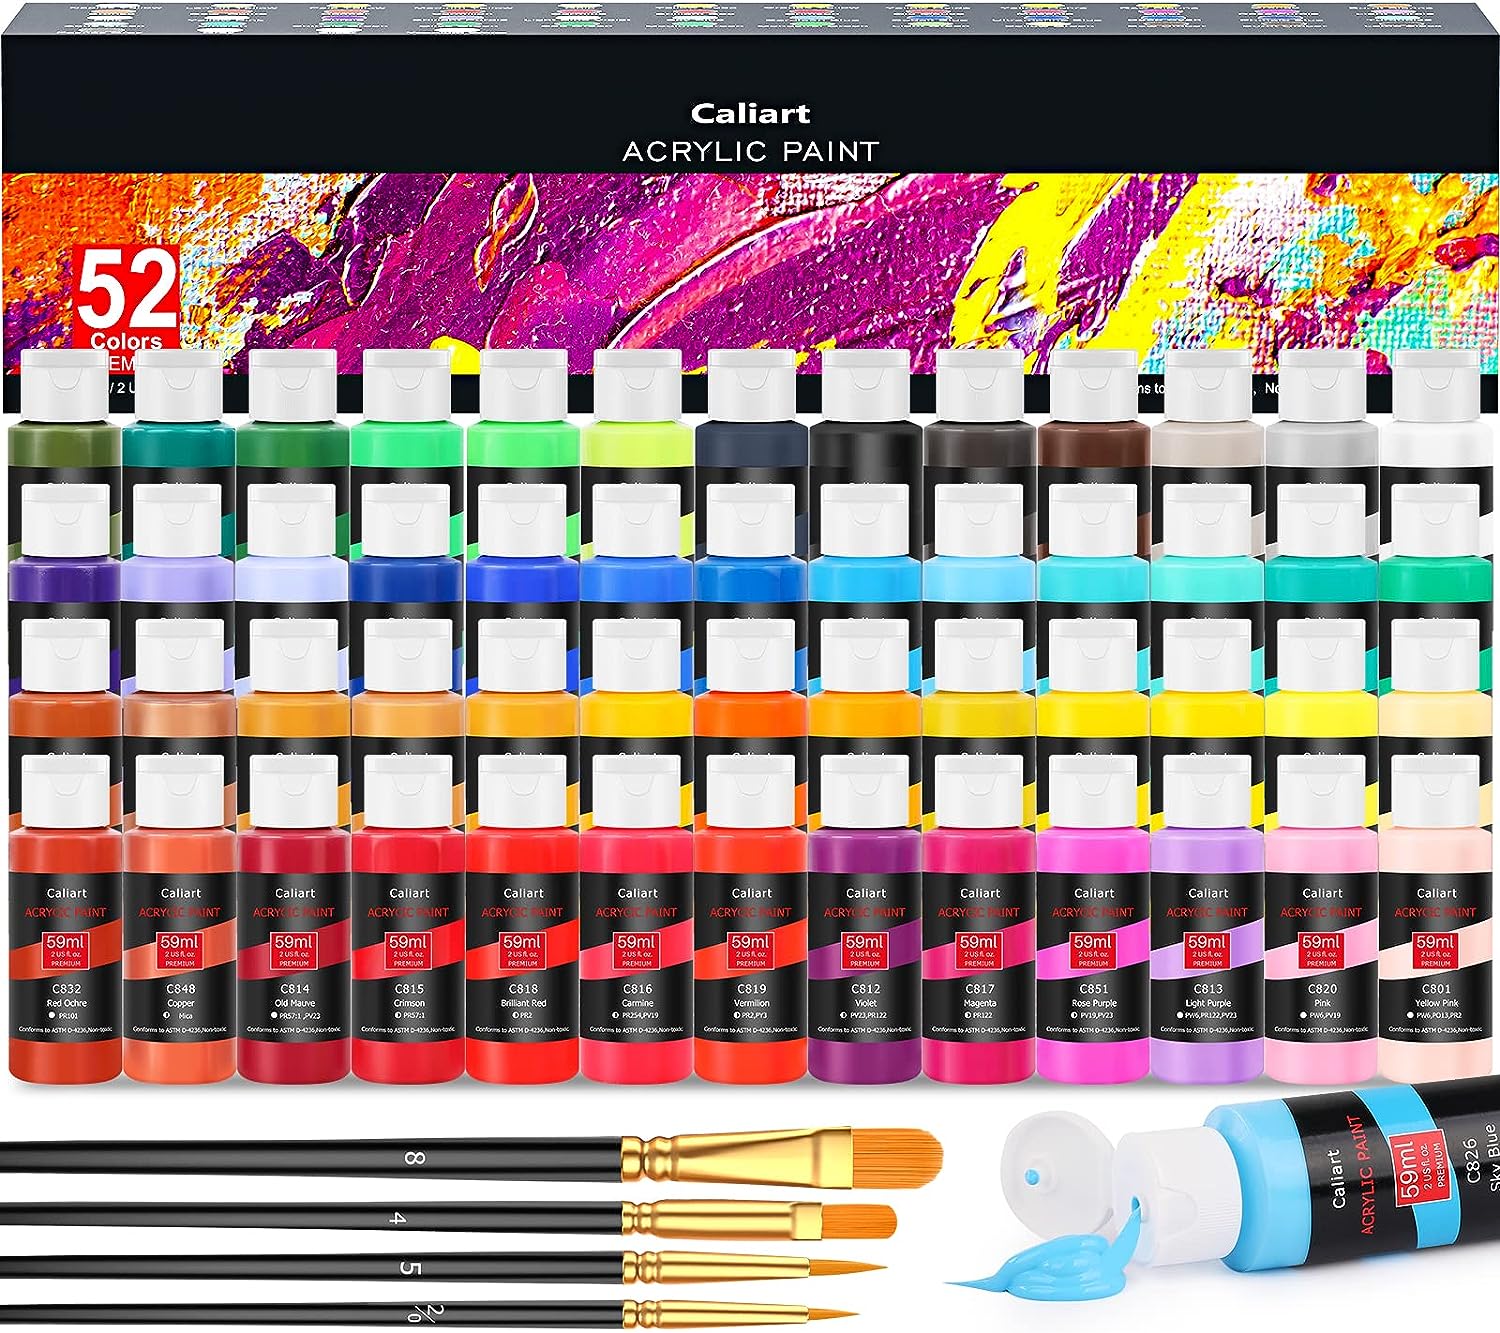 Caliart Acrylic Paint Set With 4 Brushes, 52 Colors [...]